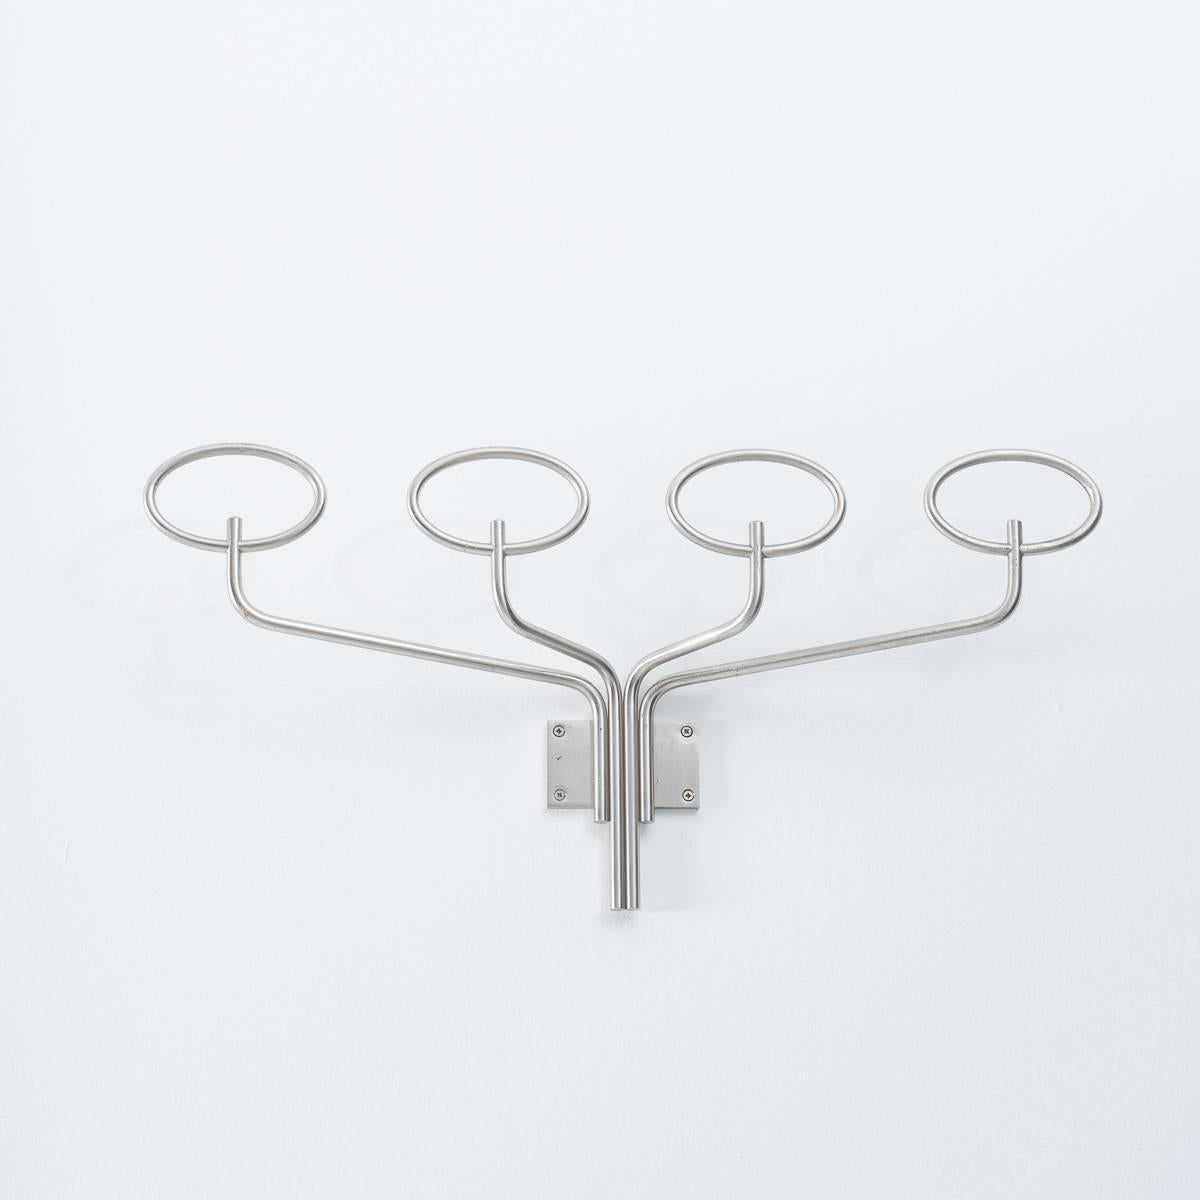 This is a large wall-mounted coat rack by Sergio Mazza for Italian manufacturers Artemide. Made from a process he loved to use, matte finish nickel plated brass. This unusual warm tone has a very slight sheen to it. This elegant coat rack has some